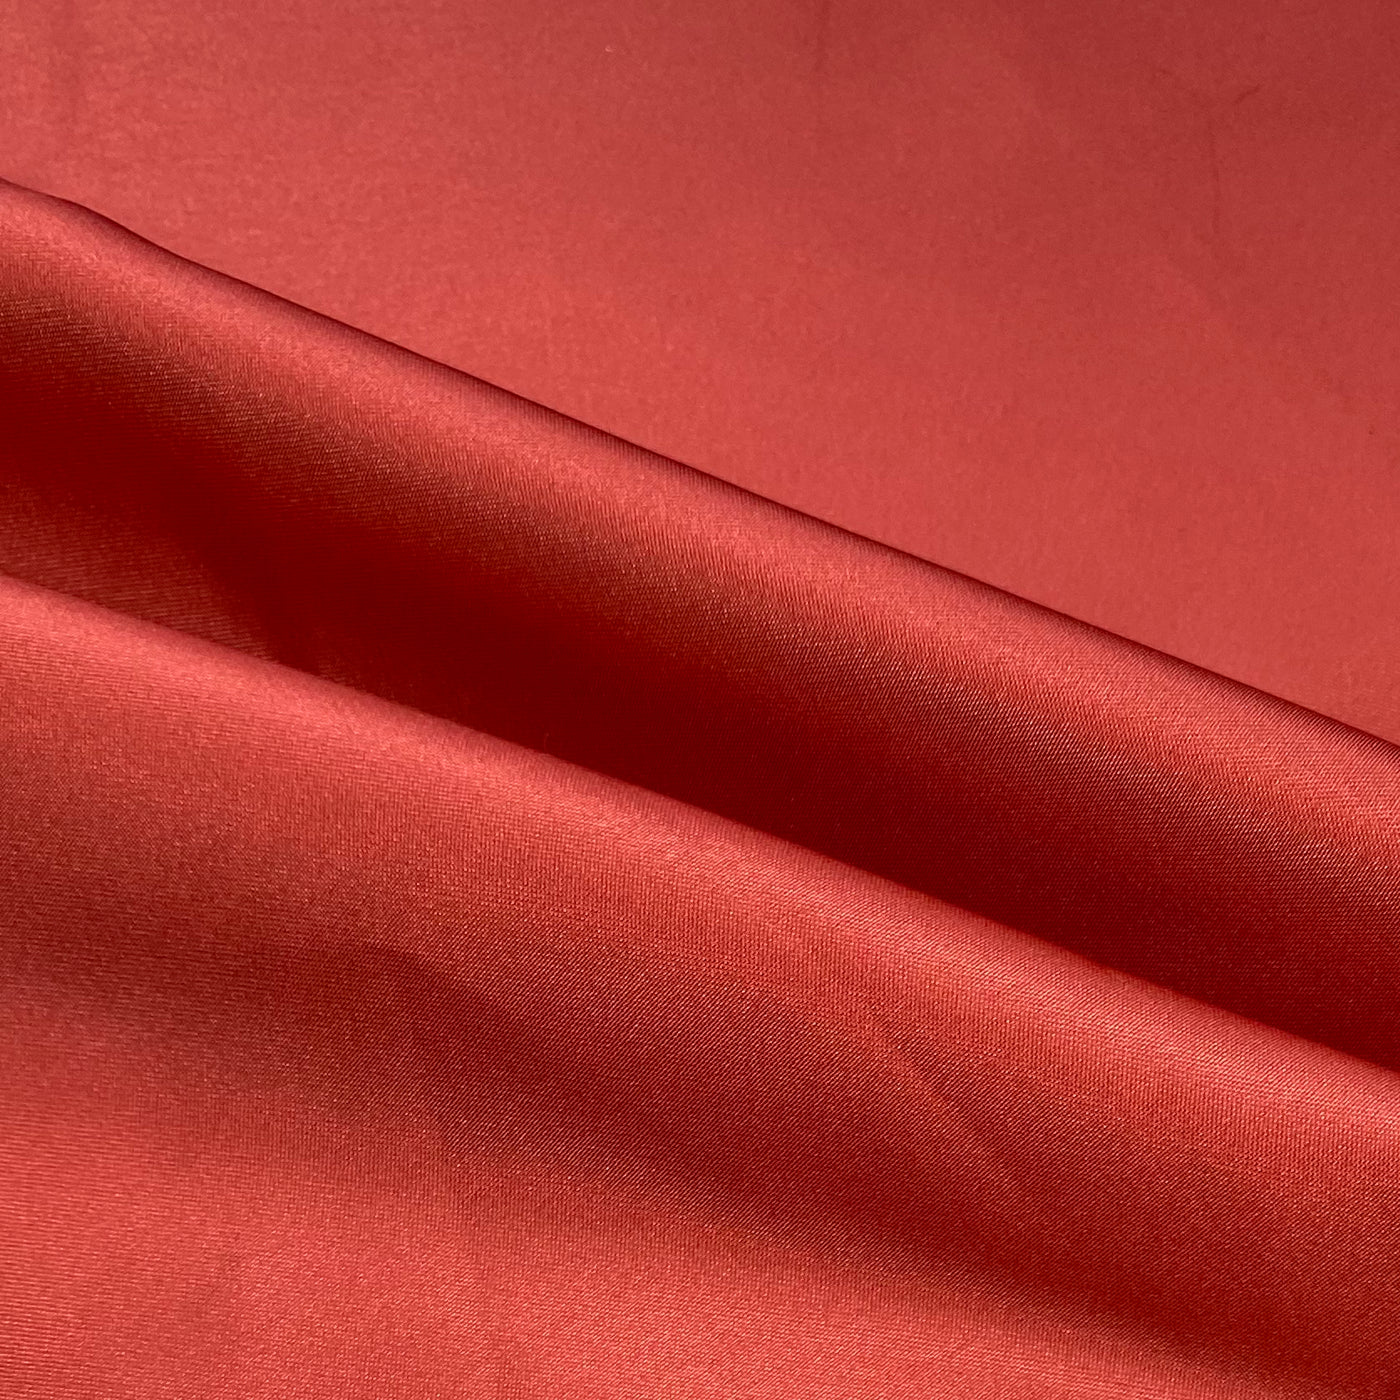 Polyester Charmeuse - 58” - Coral